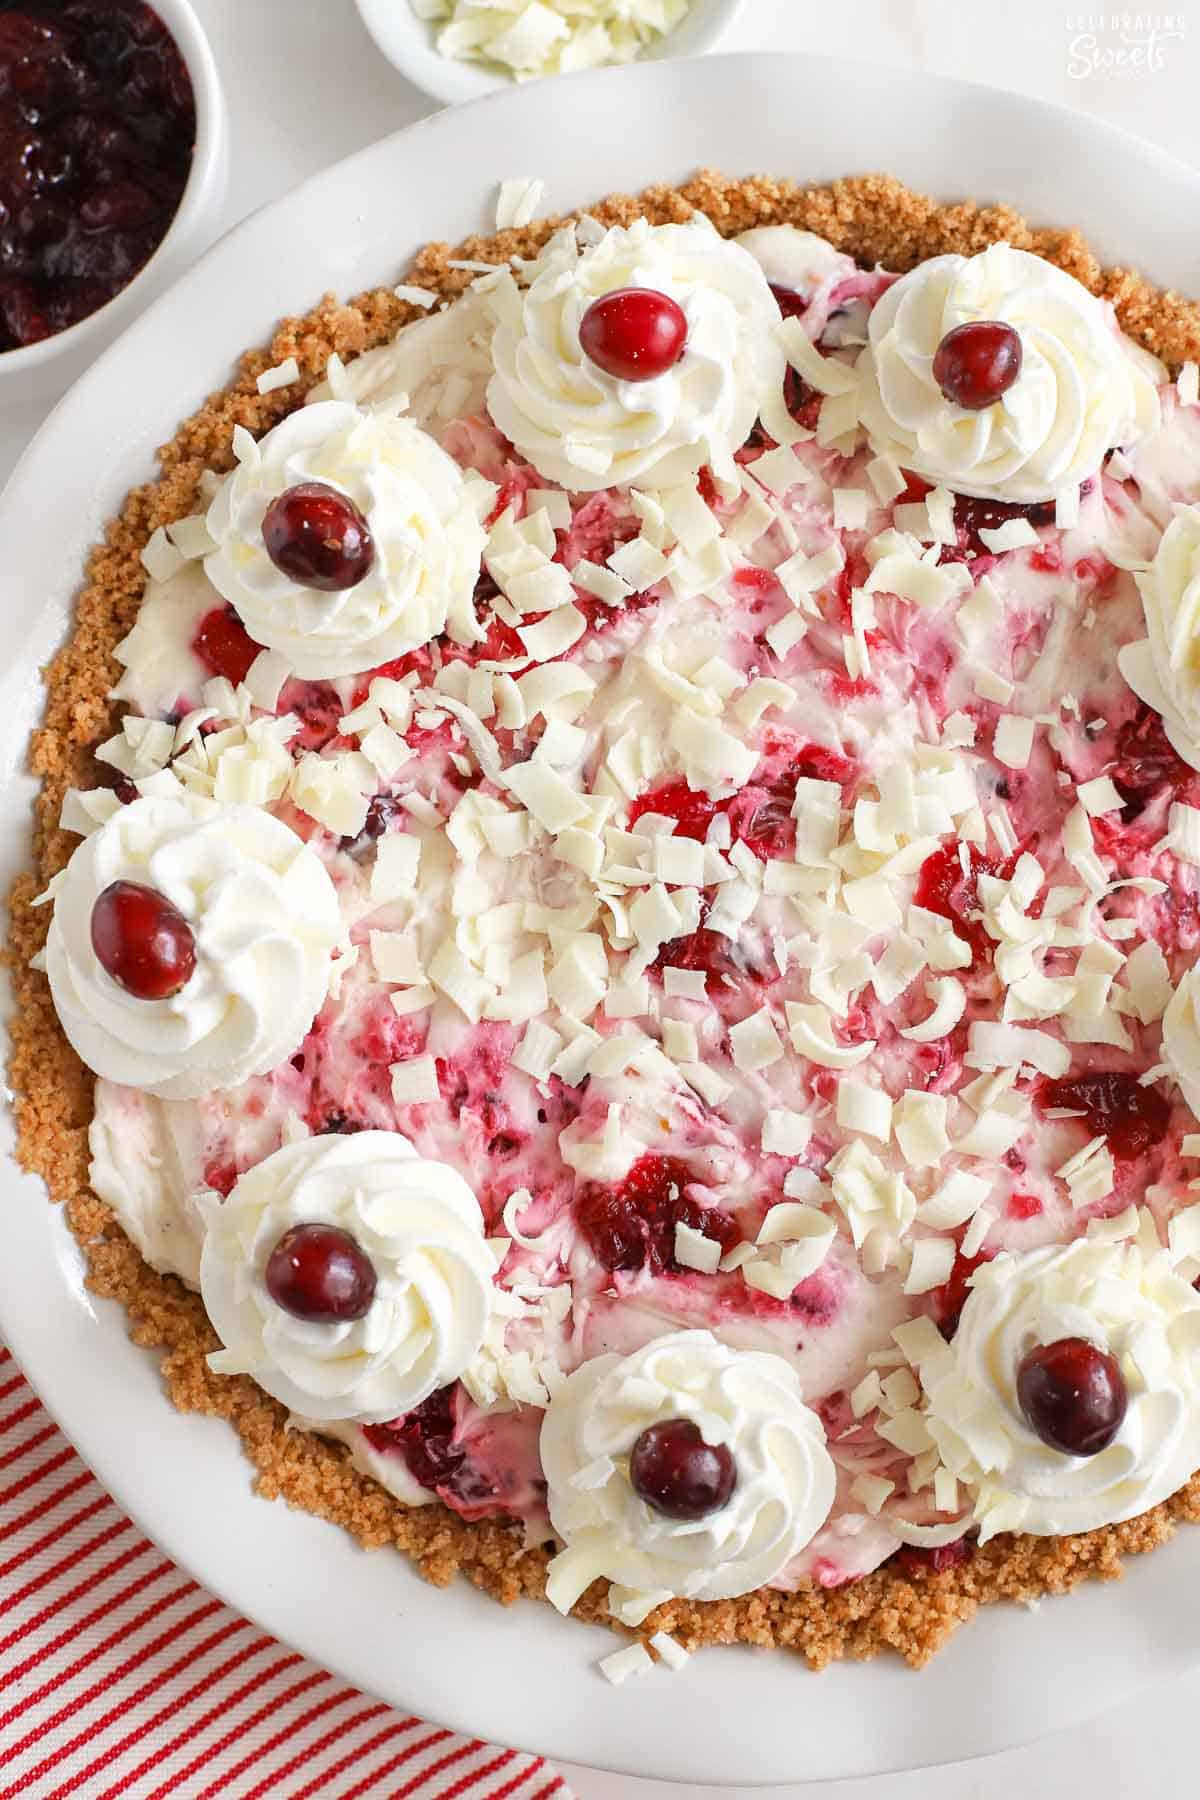 White chocolate cranberry cheesecake decorated with white chocolate shavings, whipped cream, and fresh cranberries.